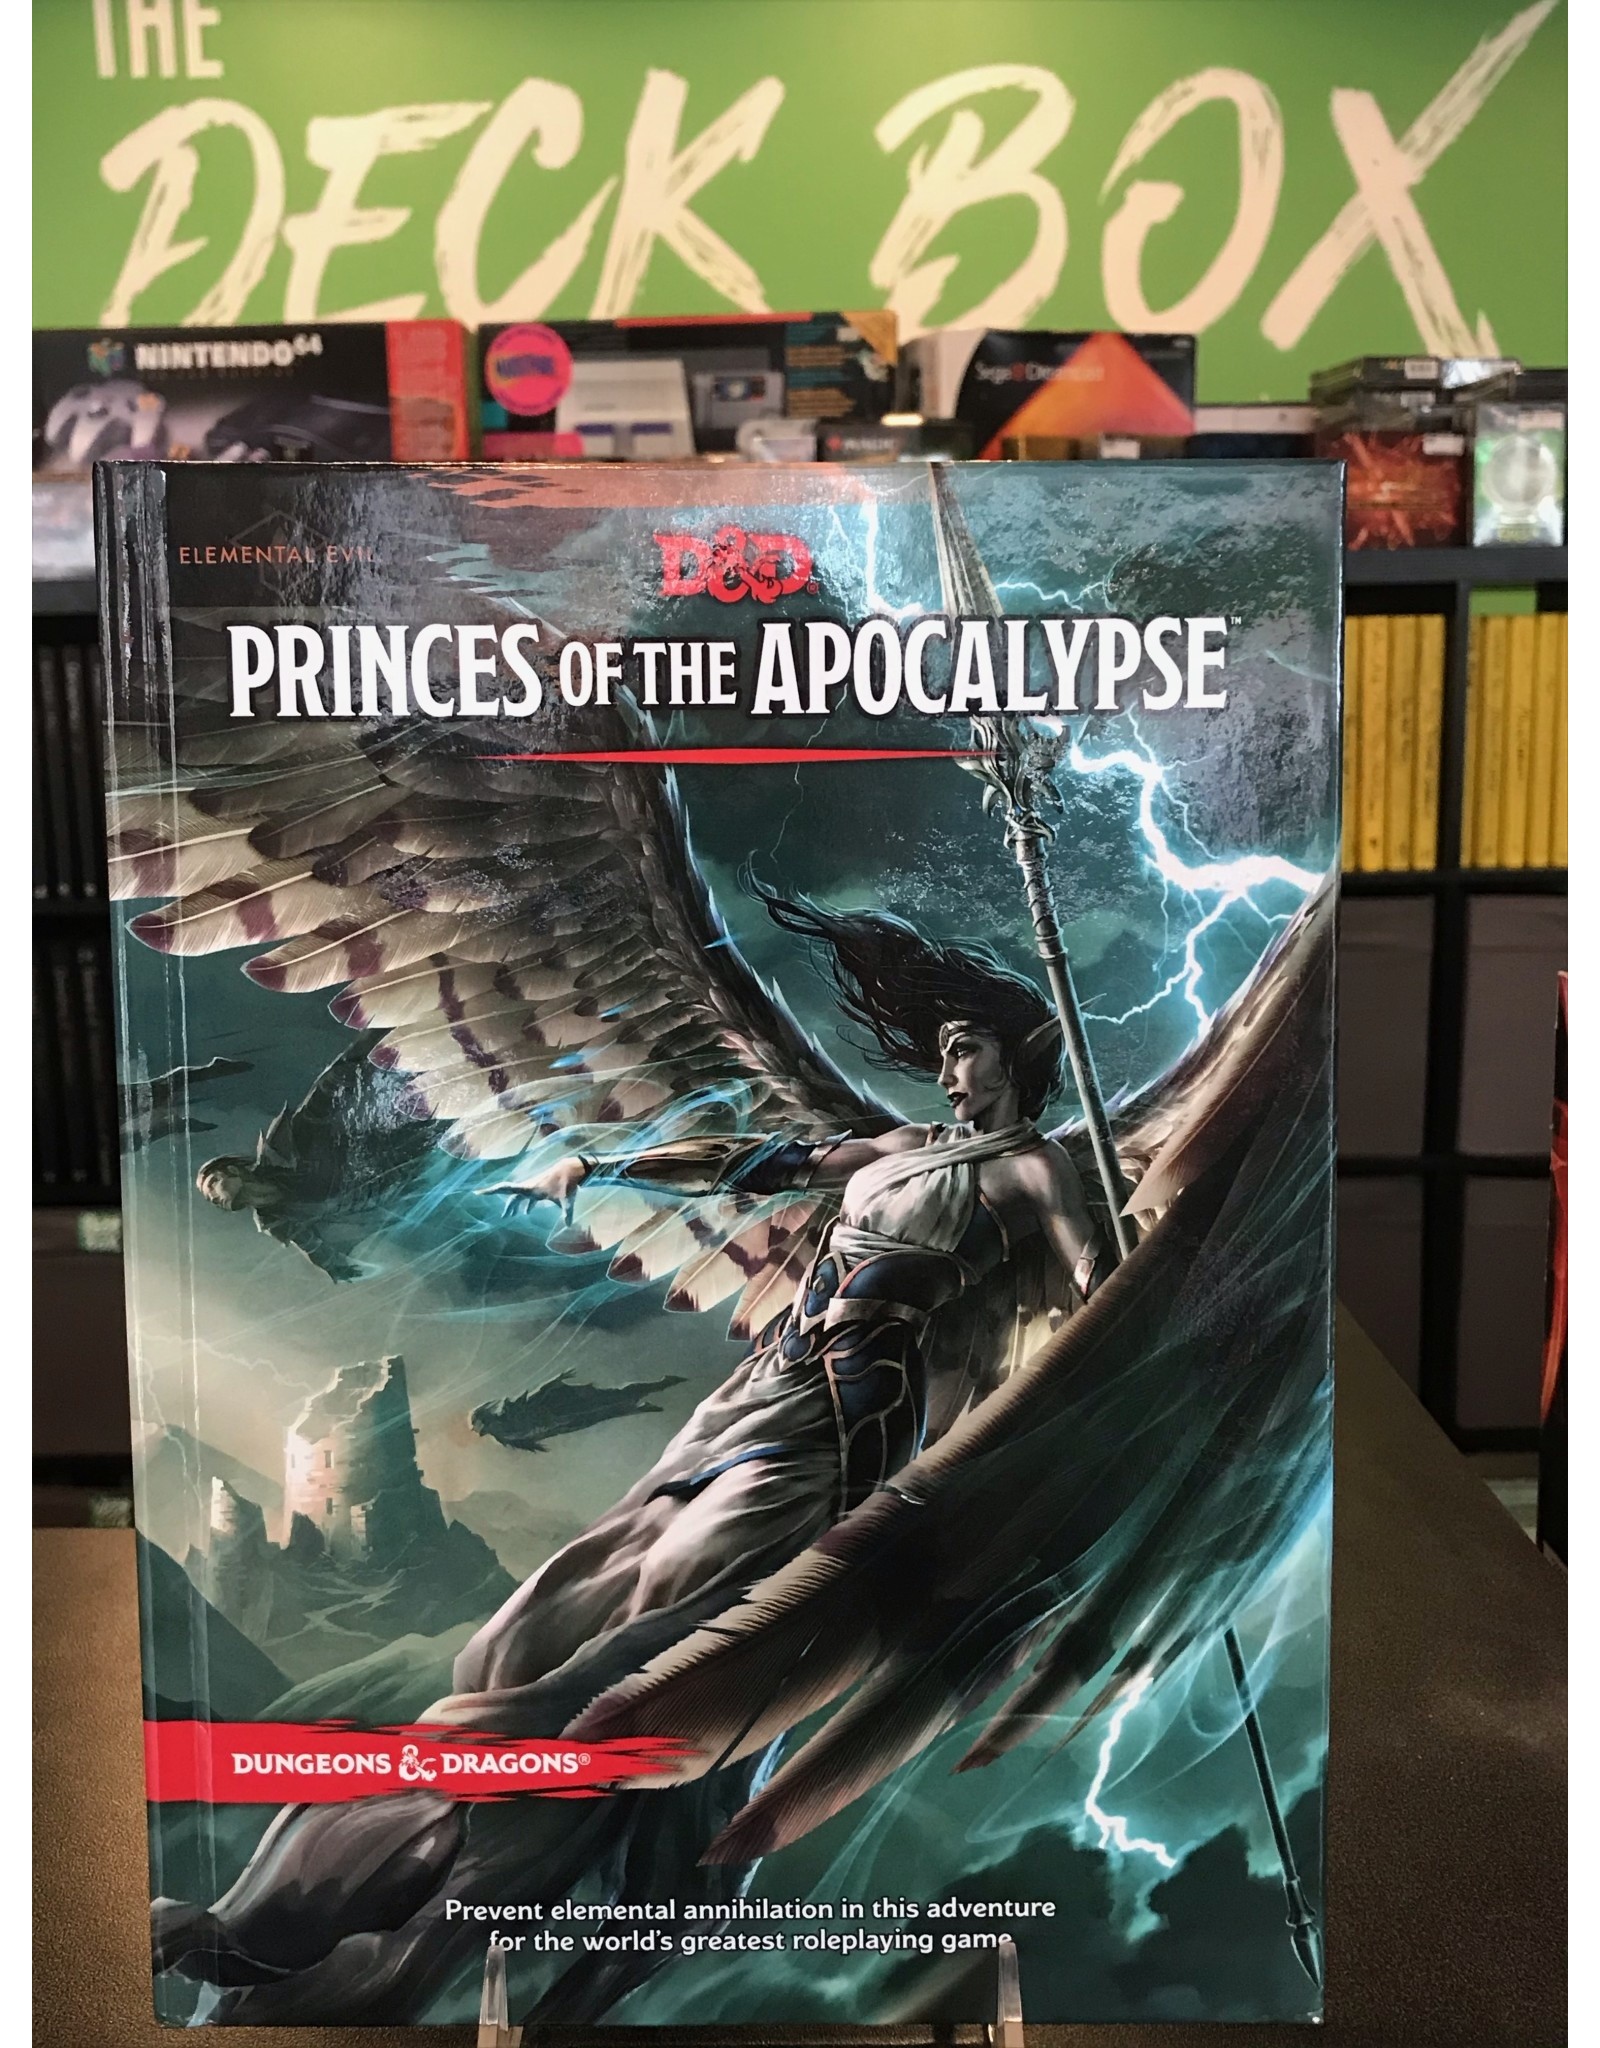 Dungeons & Dragons DND 5E ELEMENTAL EVIL: PRINCES OF THE APOCALYPSE